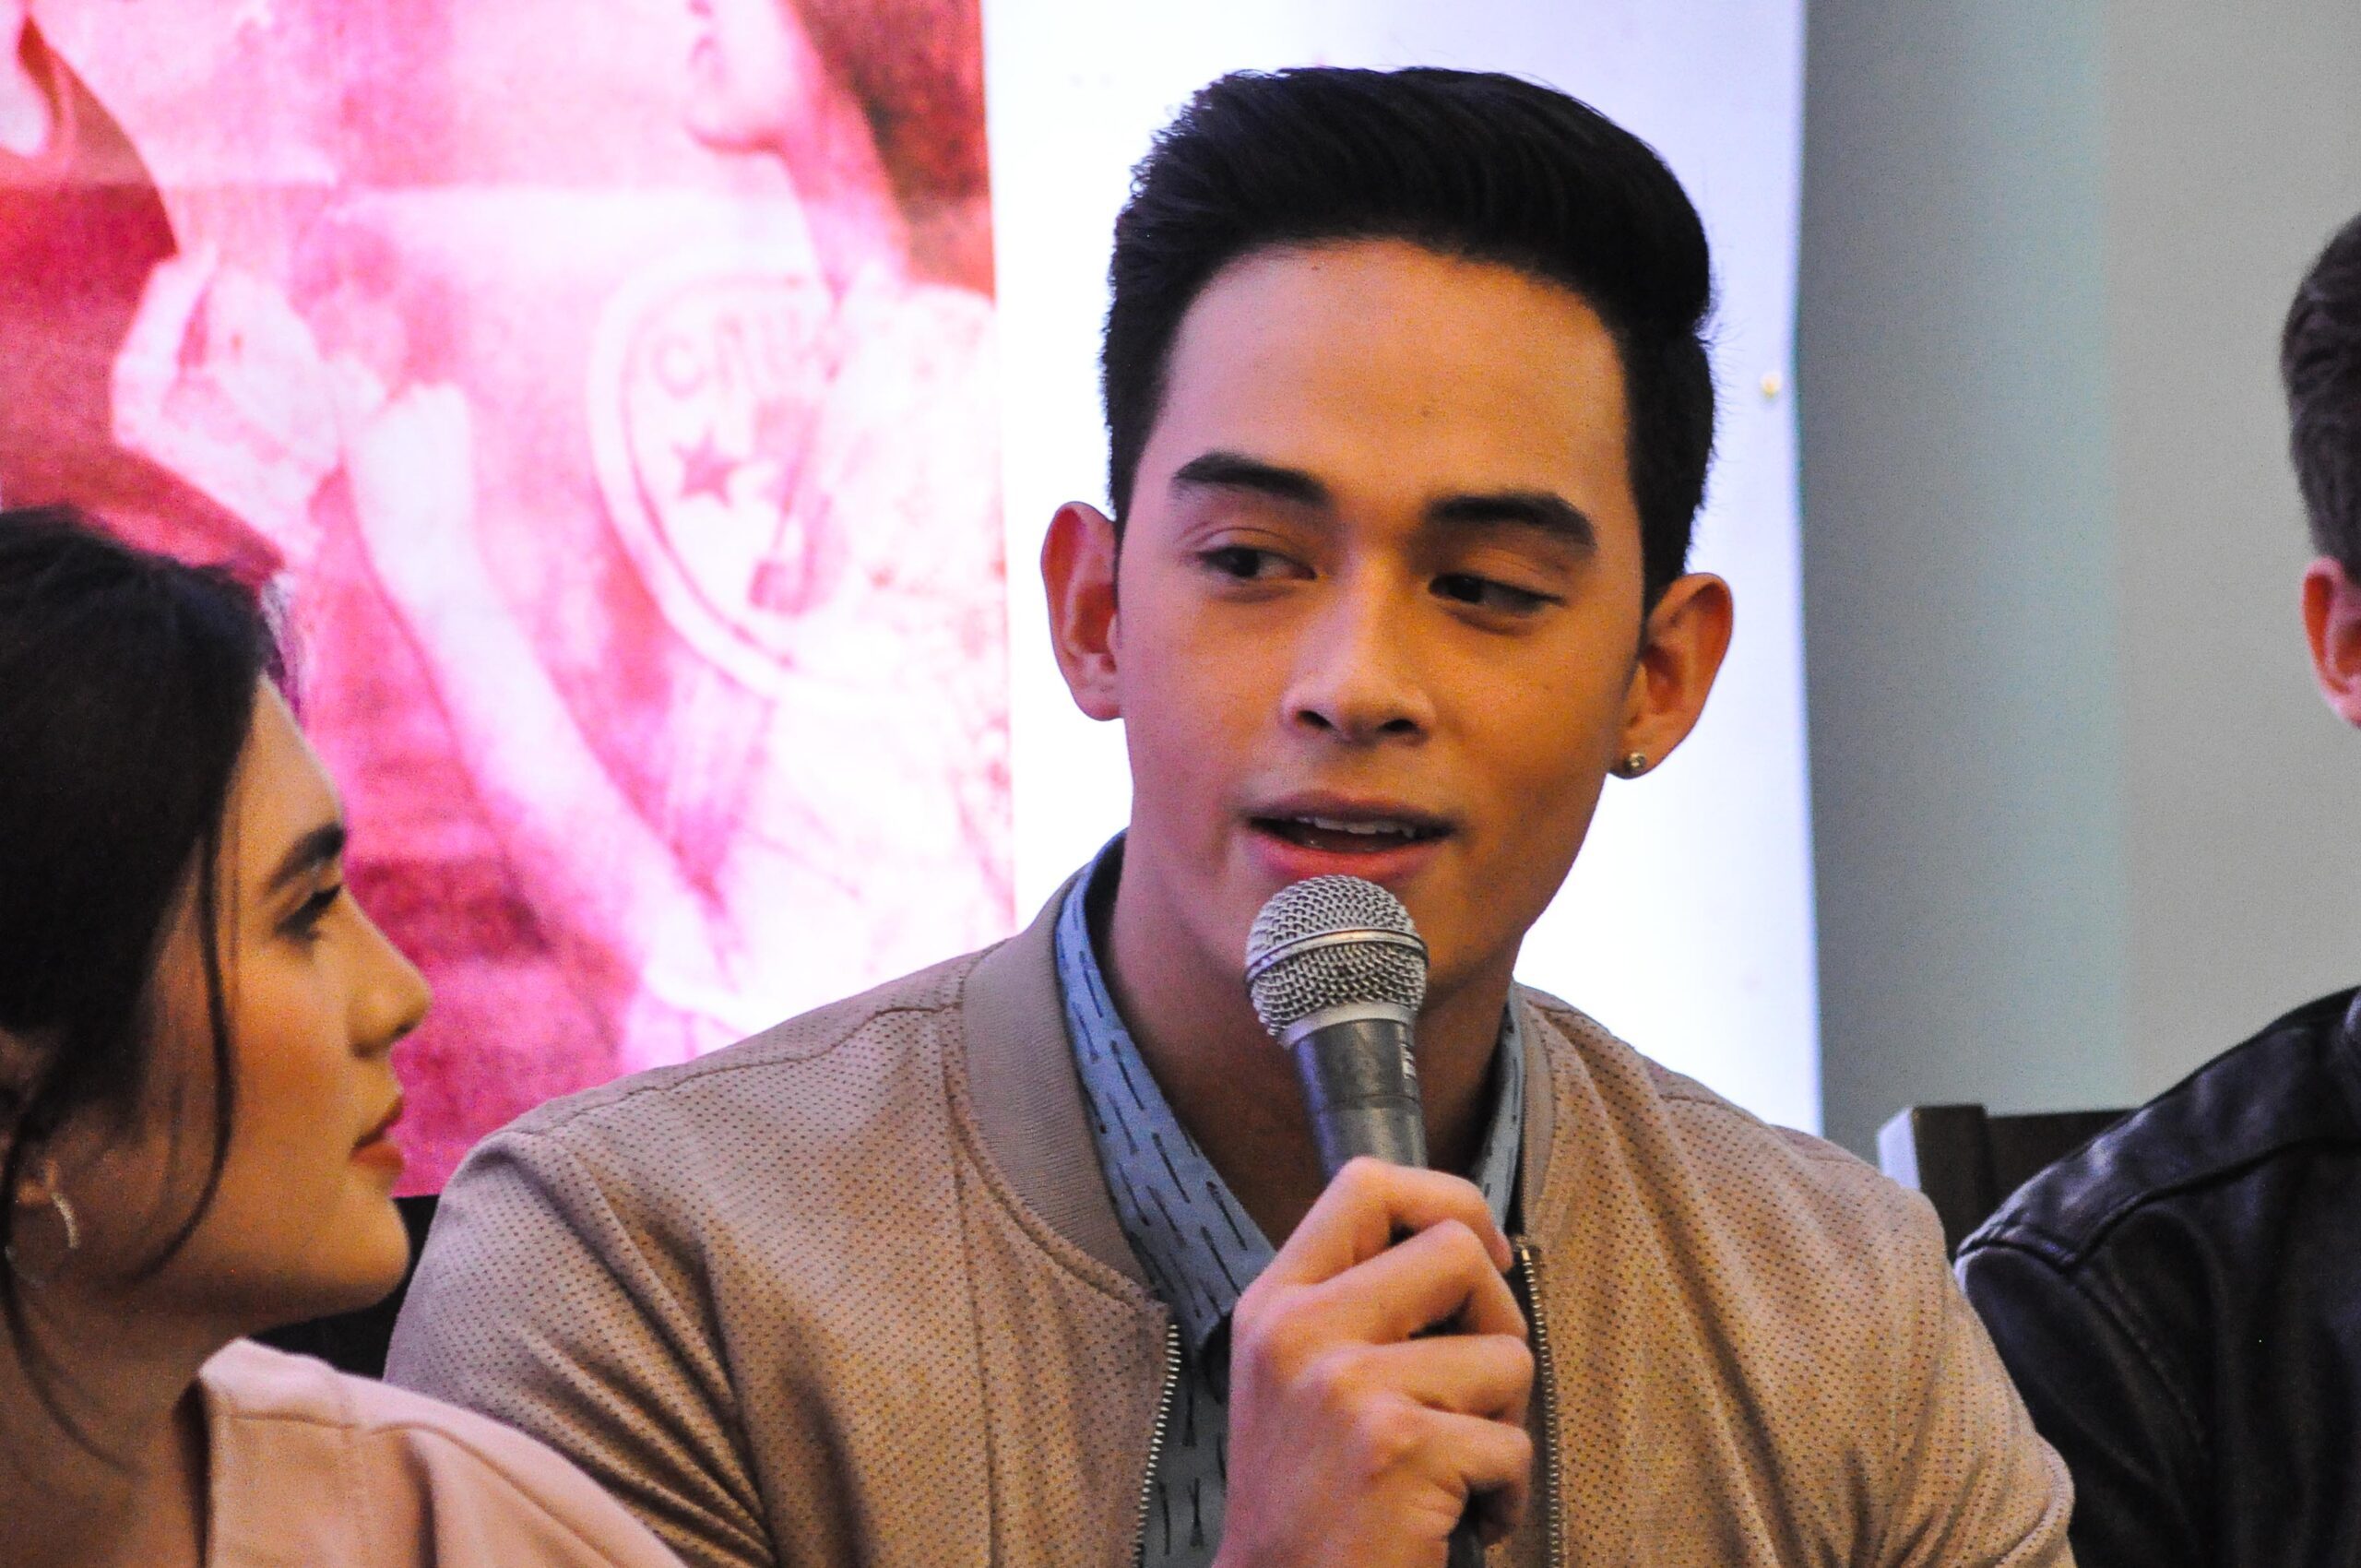 Nude video circulating online posted accidentally – Diego Loyzaga